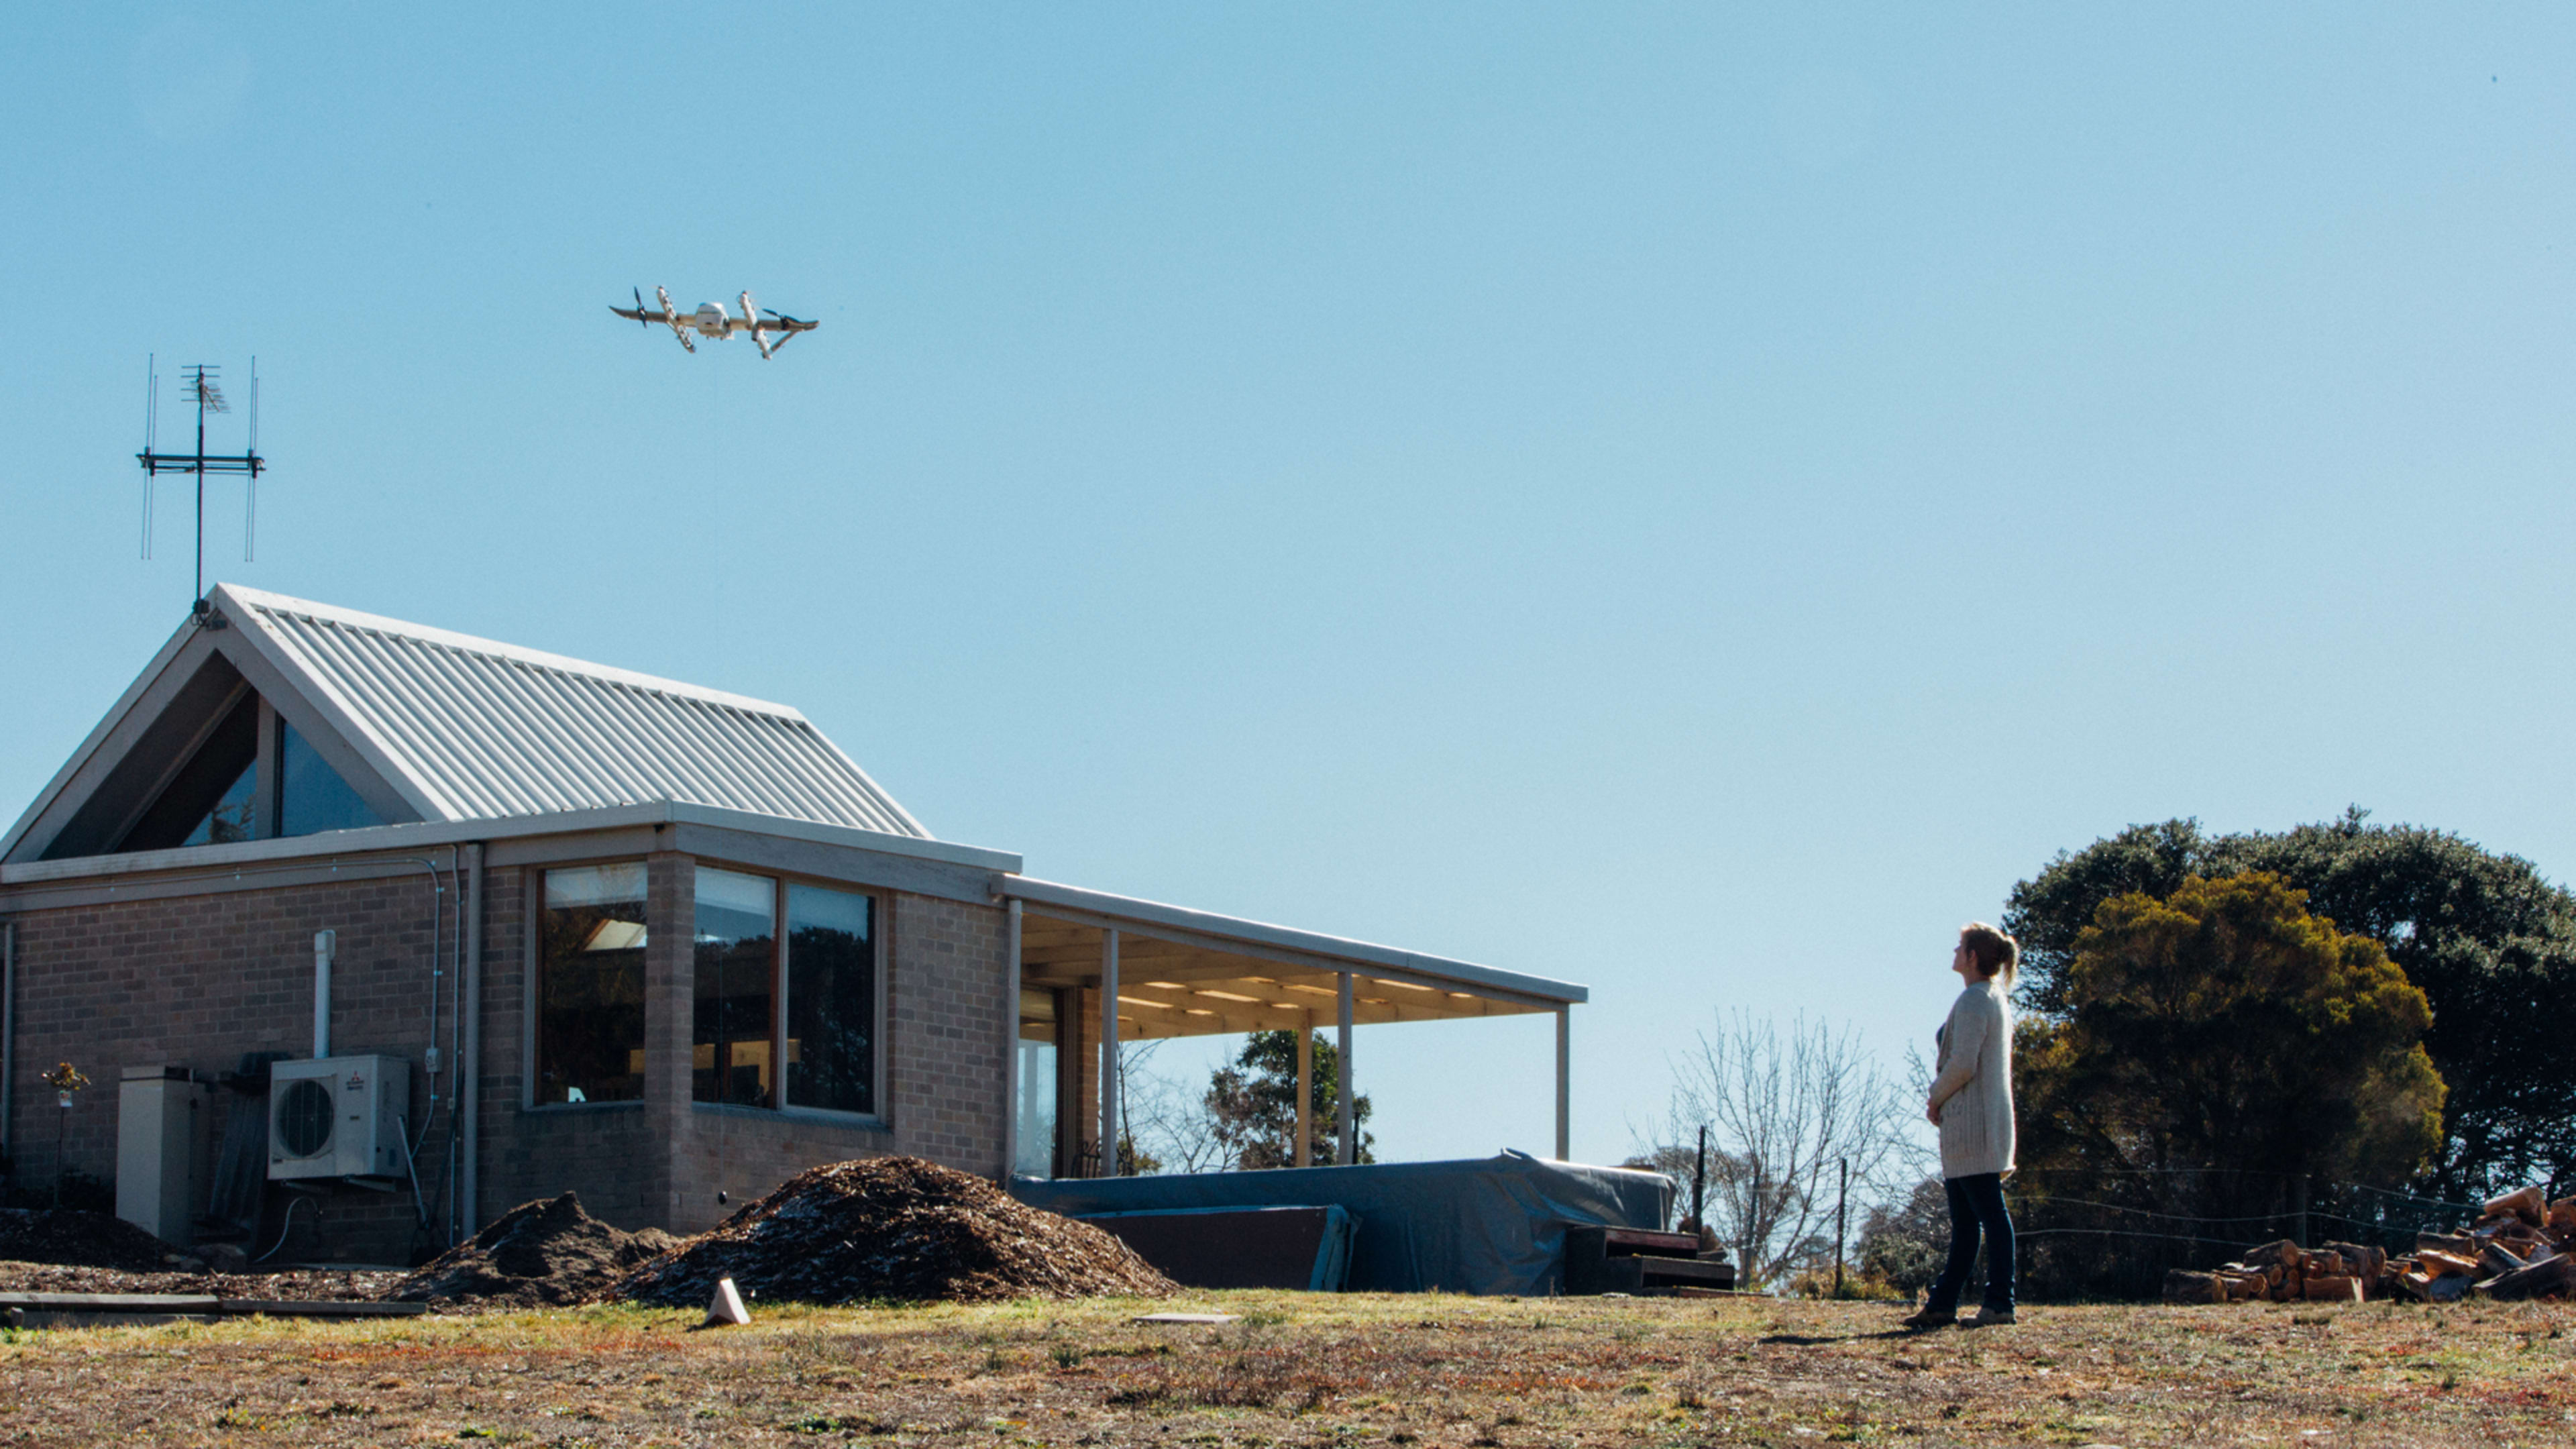 Alphabet launches its Wing drone delivery service in Australia